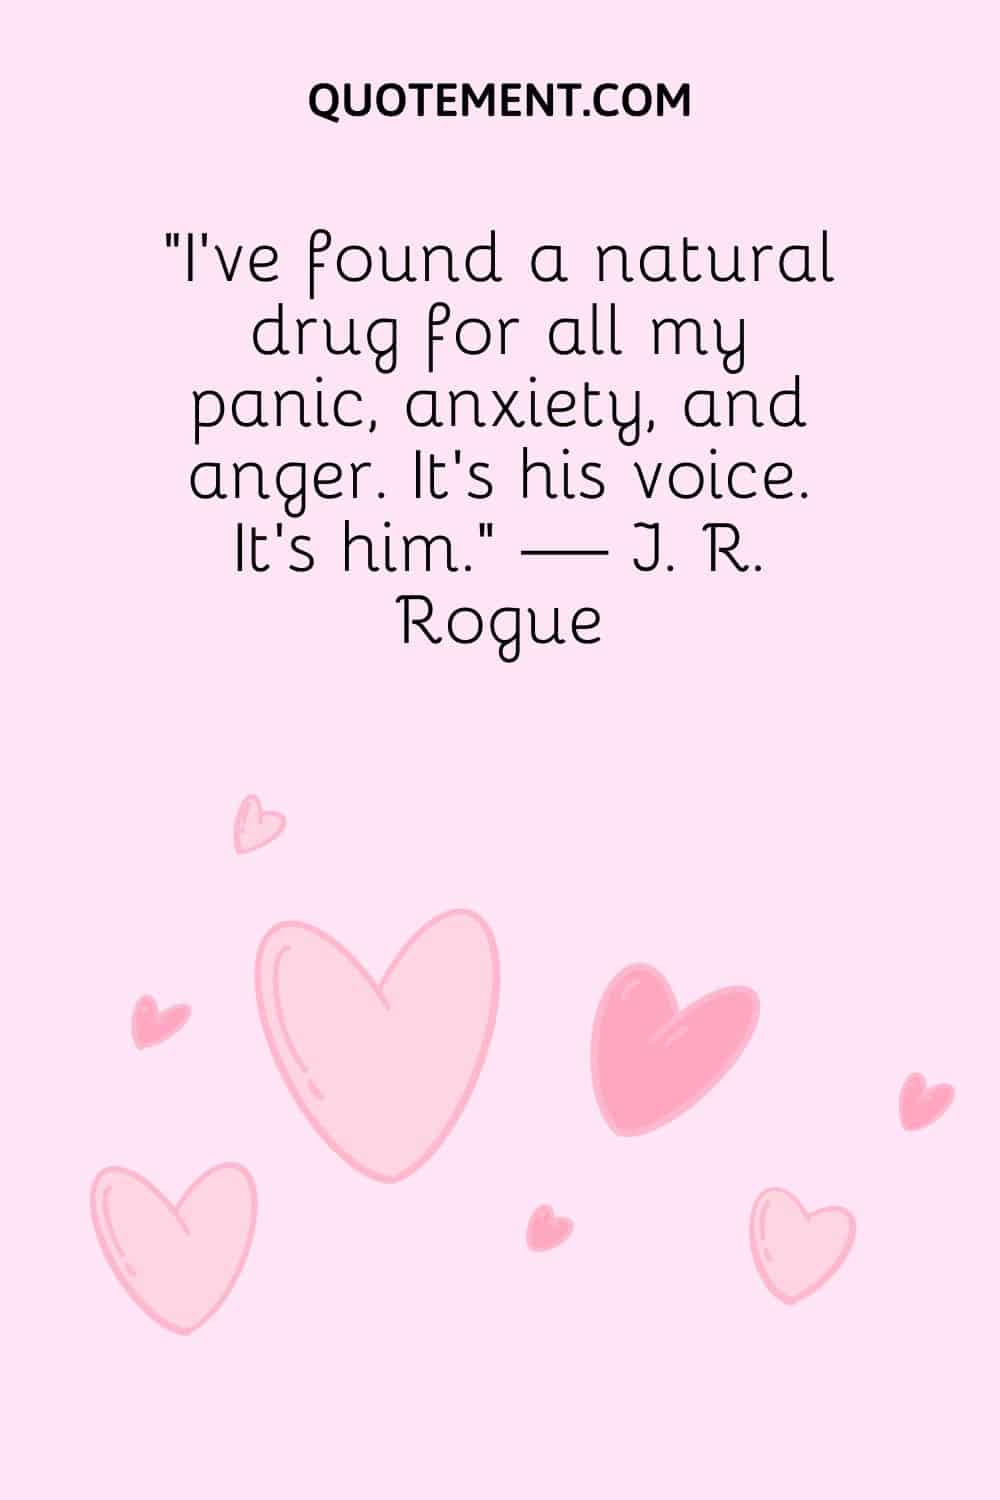 “I’ve found a natural drug for all my panic, anxiety, and anger. It’s his voice. It’s him.” — J. R. Rogue